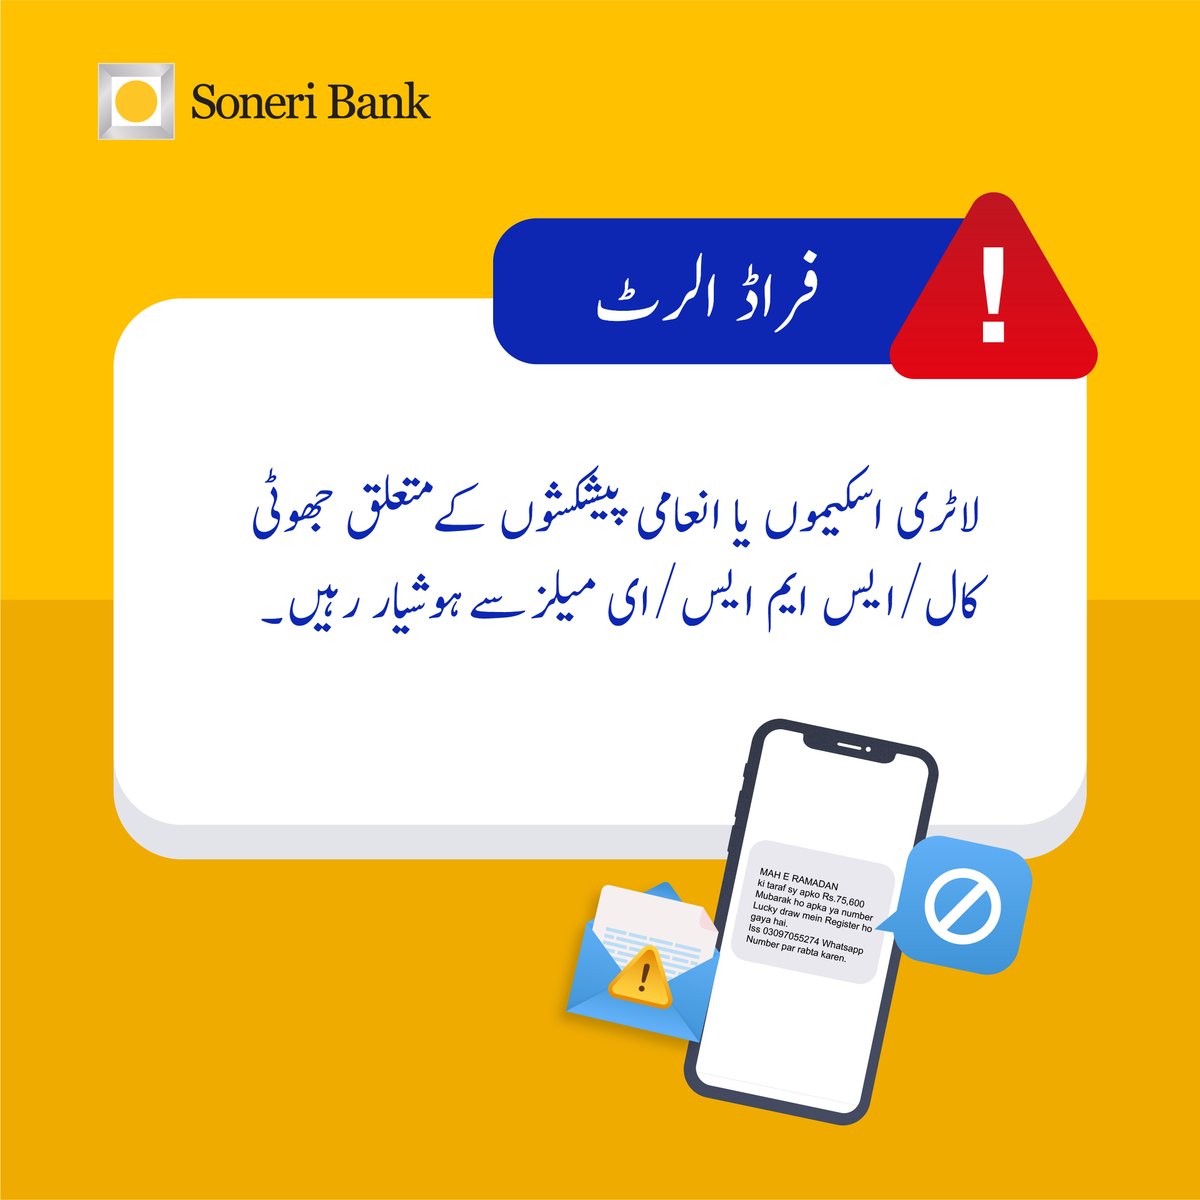 Watch out for fraudulent calls, texts, and emails about lottery winnings and prizes. They're all scams!  
Stay alert, stay safe!

#SoneriBank #RoshanHarQadam #FraudAlert